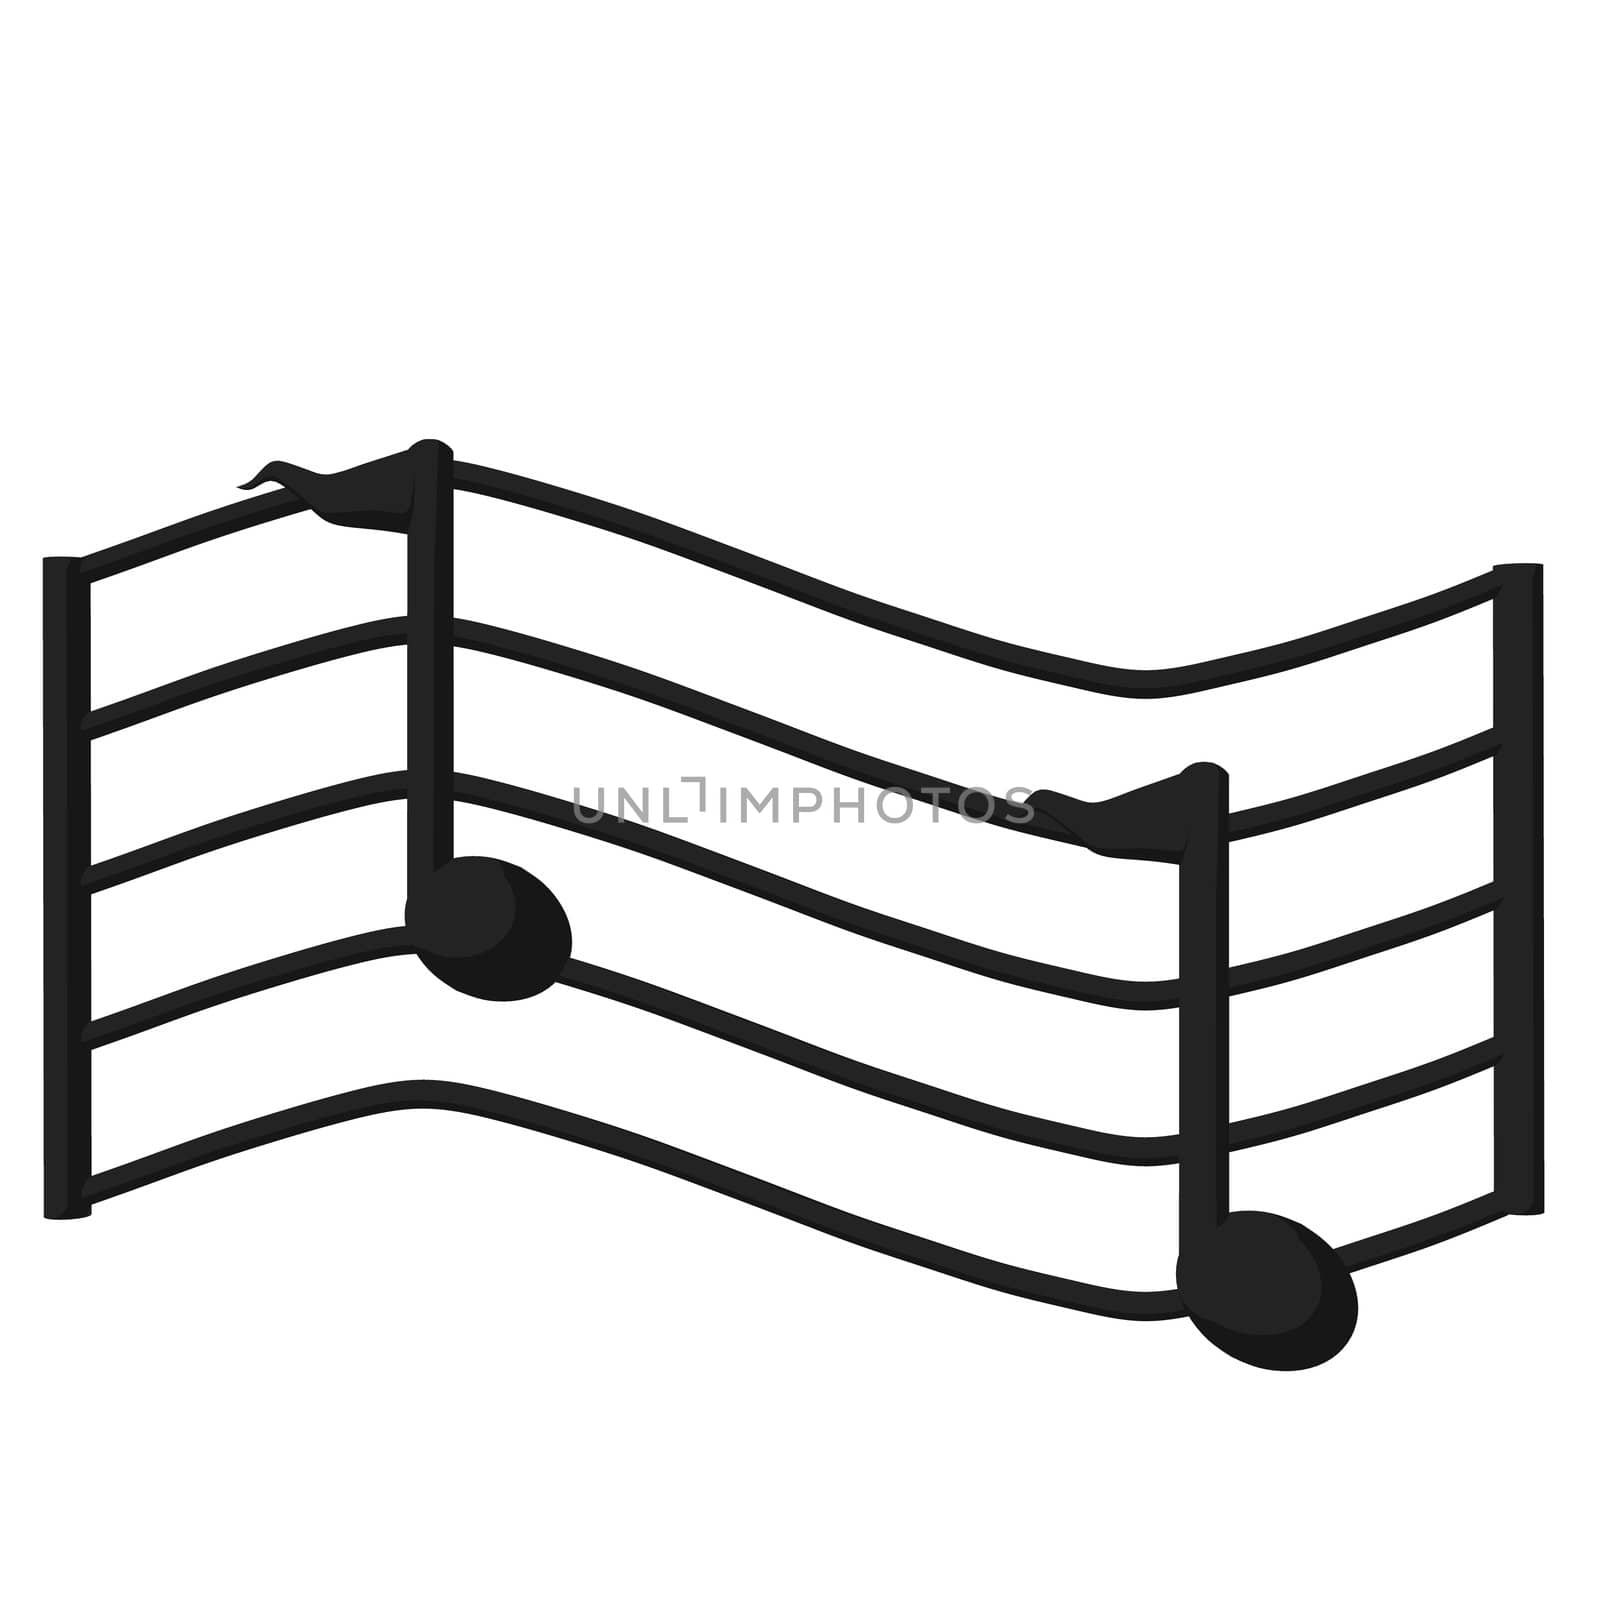 Illustration of a music scale on a white background